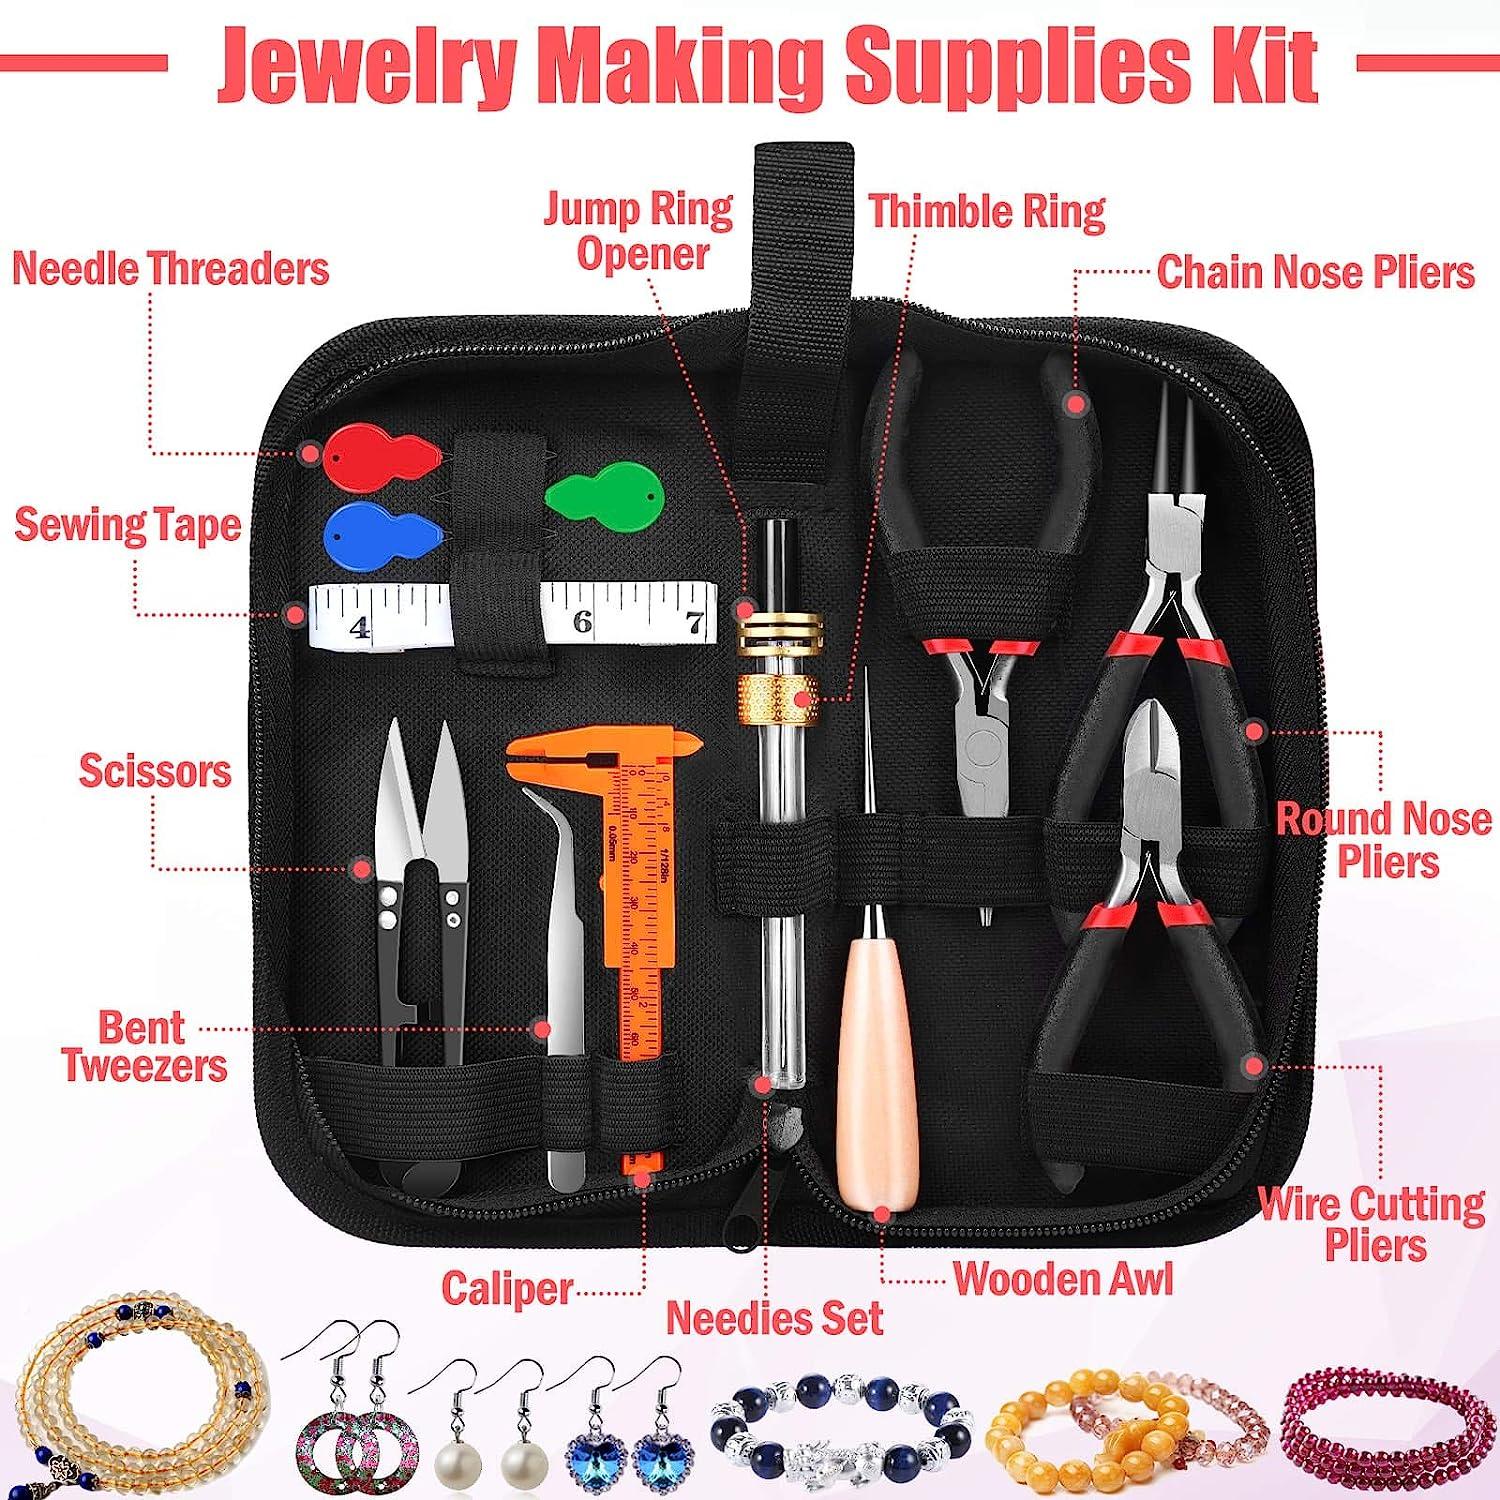 Thrilez Jewelry Wire Wrapping Jewelry Making Supplies Kit with Craft Ring  Wire Jewelry Tools Jewelry Pliers and Jewelry Findings for Jewelry Repair  Wire Wrapping and Beading